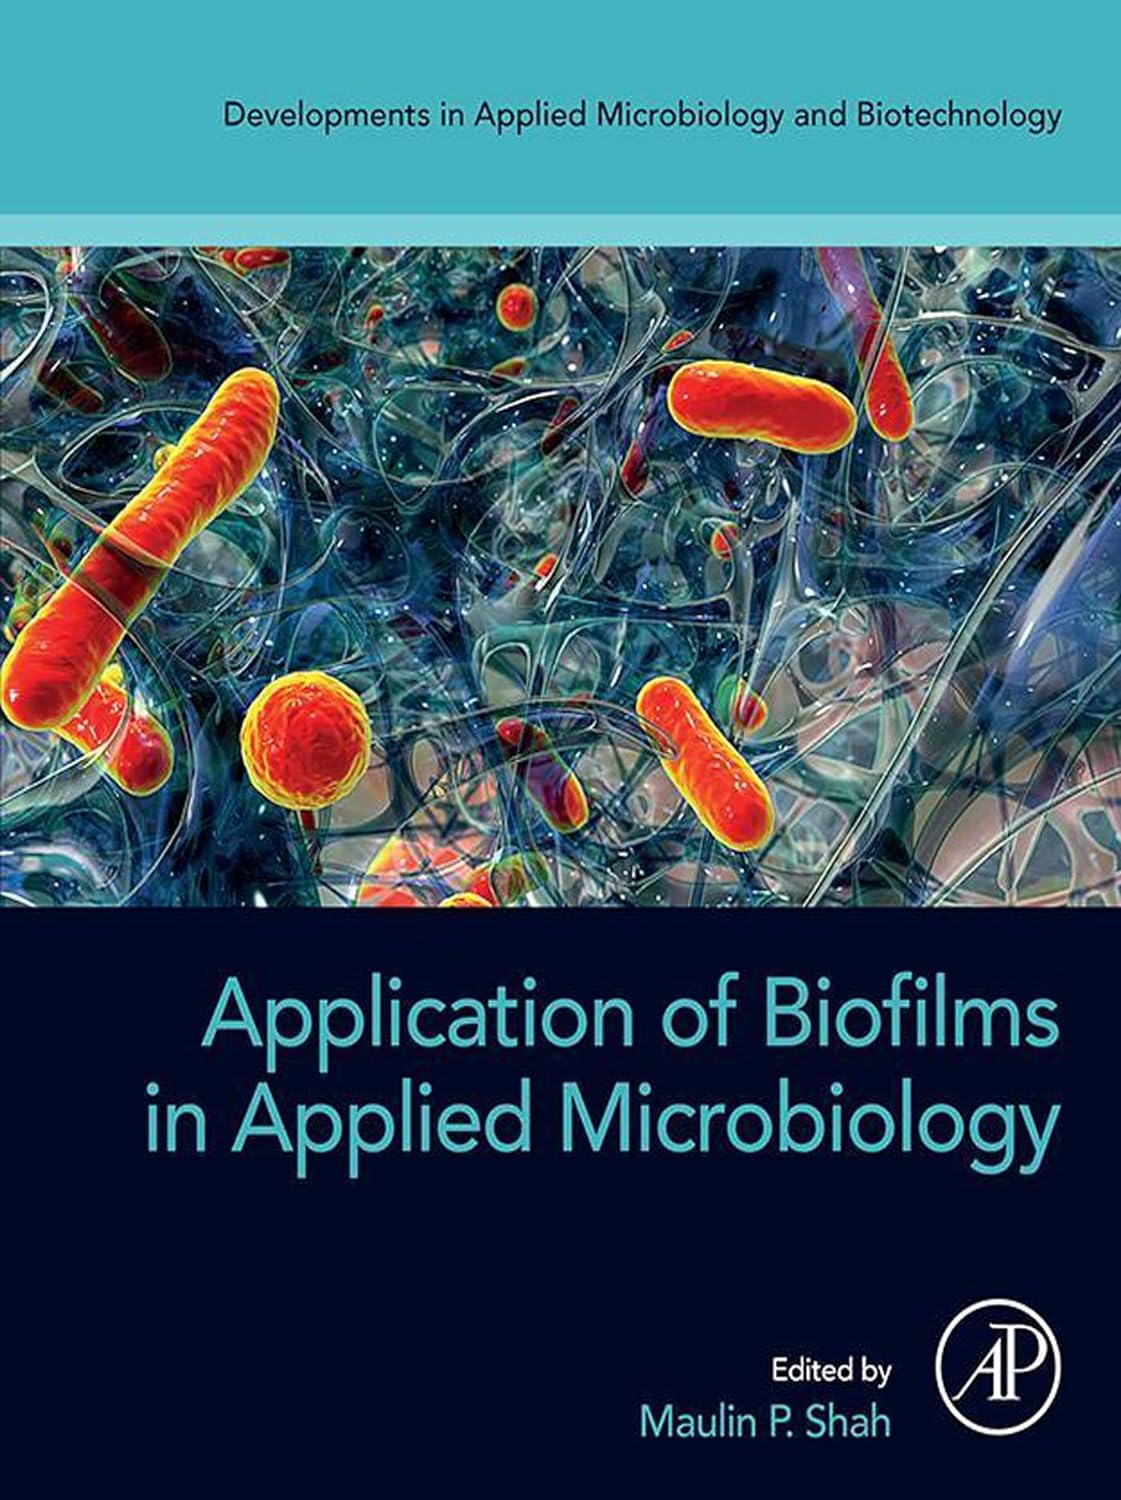 Application of Biofilms in Applied Microbiology by Maulin P Shah 